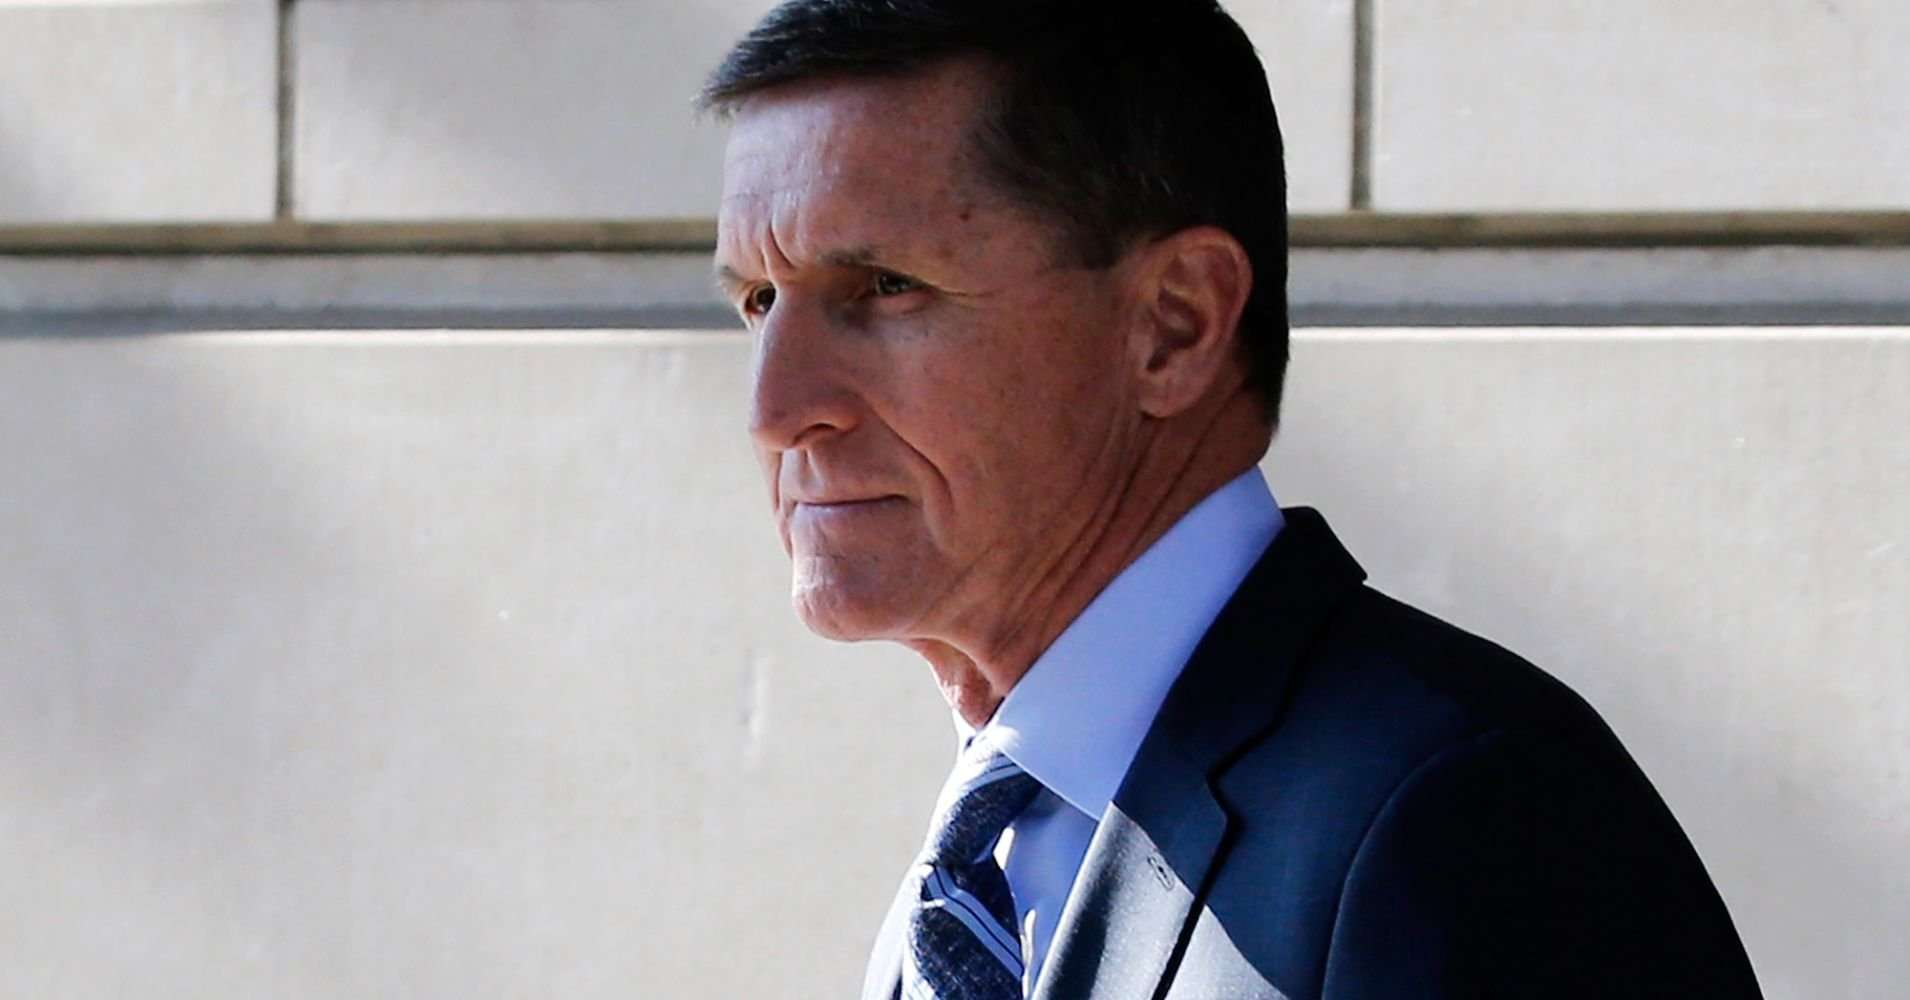 image for Mueller says Michael Flynn gave 'firsthand' details of Trump transition team contacts with Russians